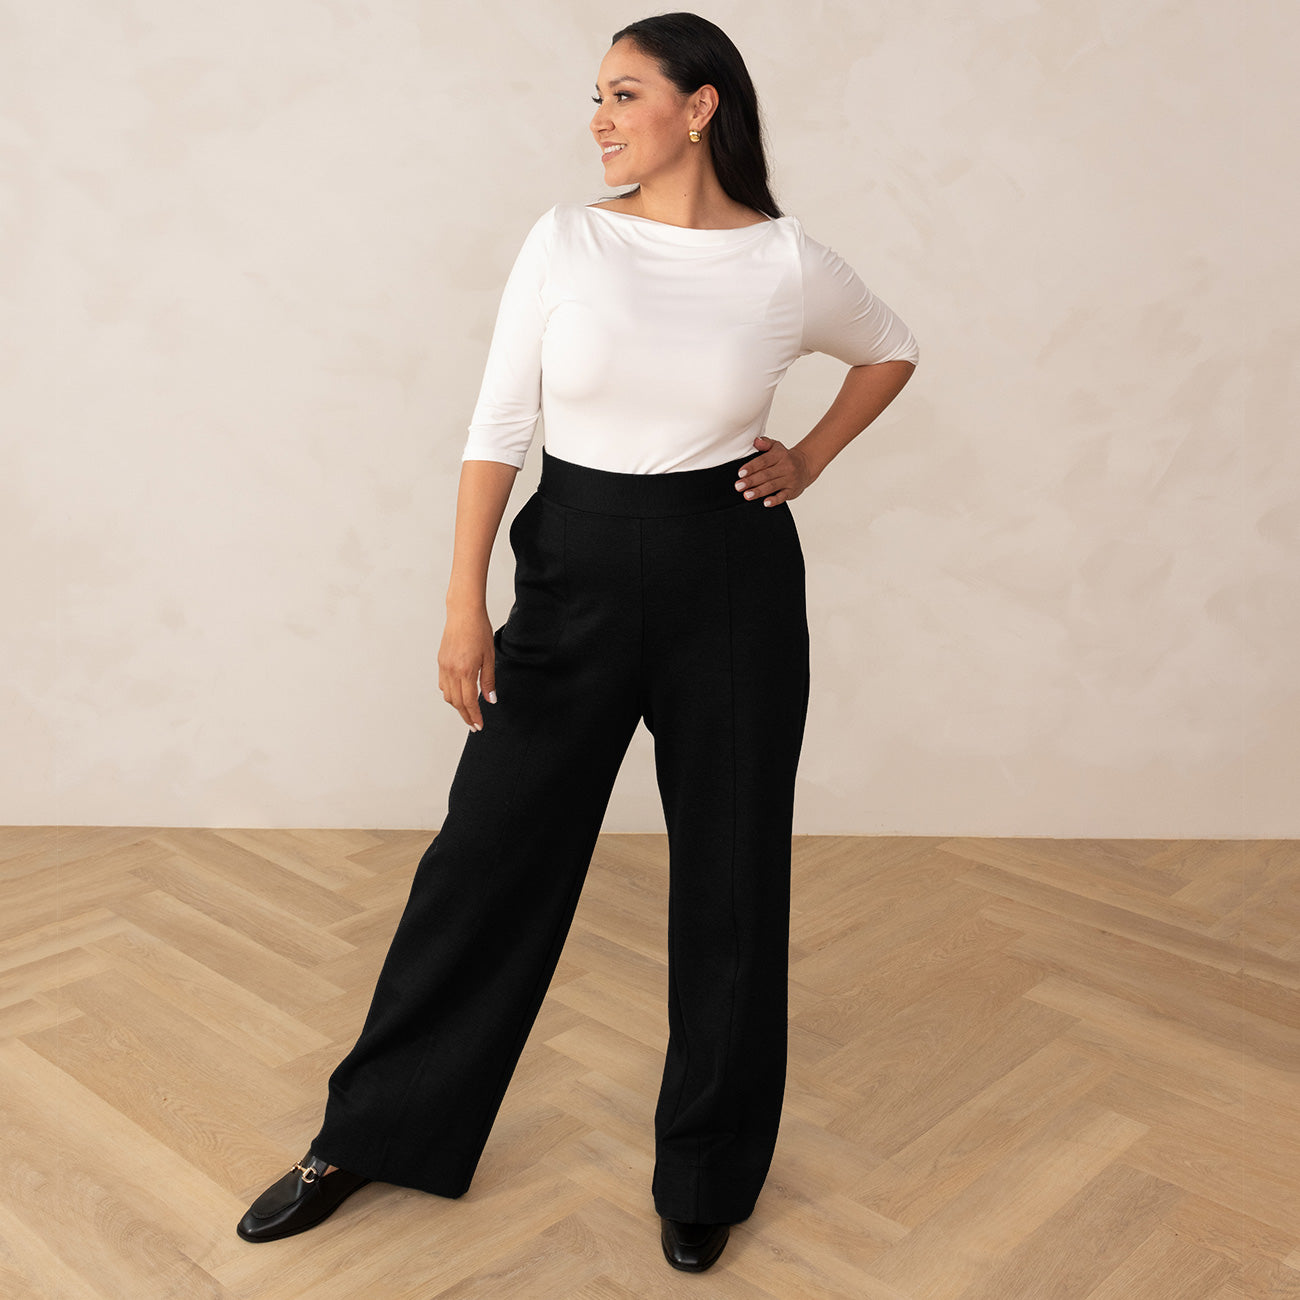 The Tailored Ponte Trouser  Women's Sustainable Wide Leg Pant